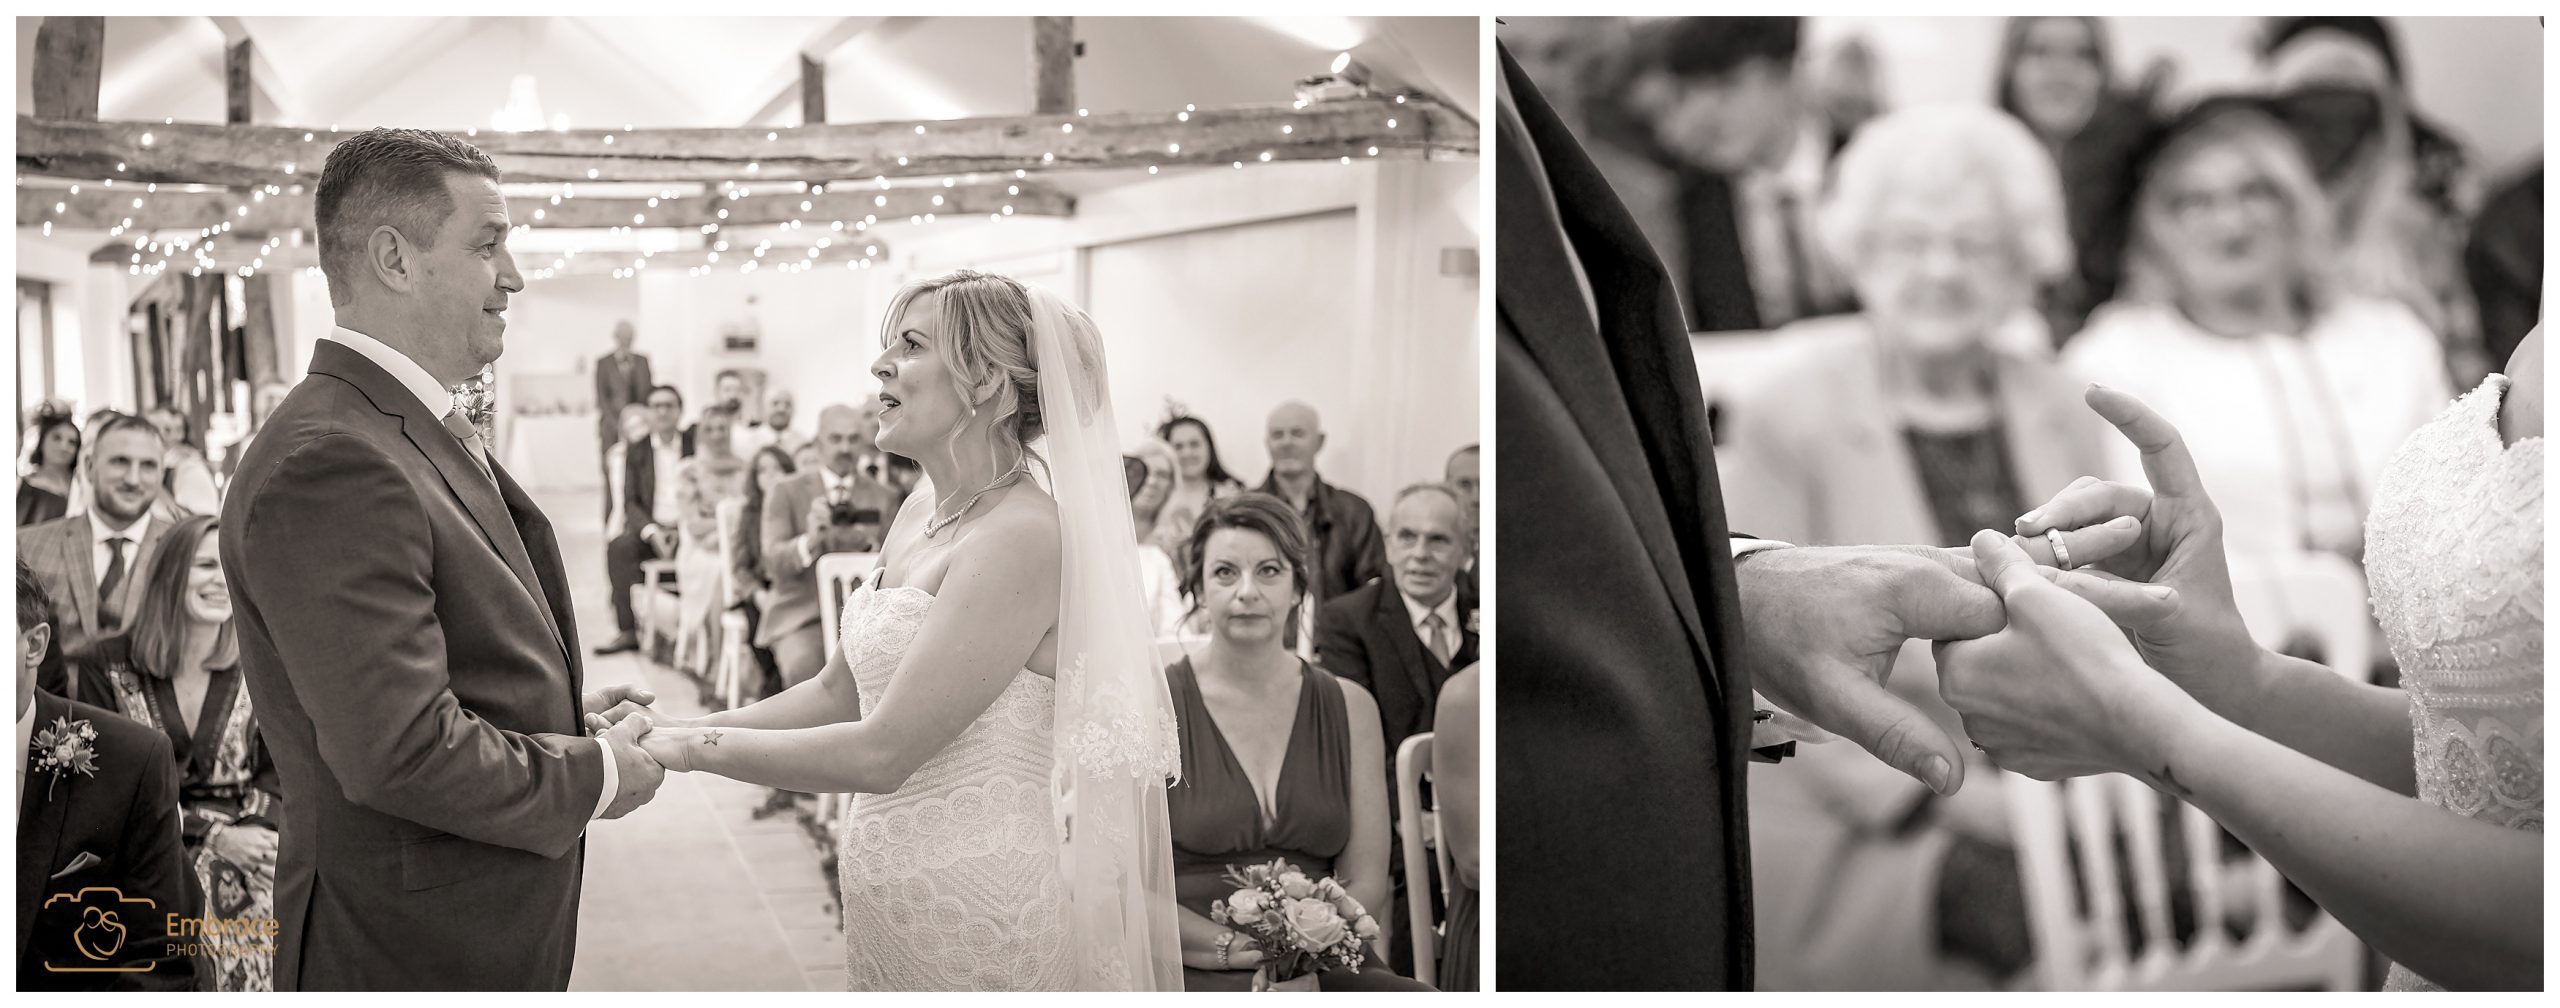 Bride places ring onto the groom during their ceremony at White Dove Barns Suffolk